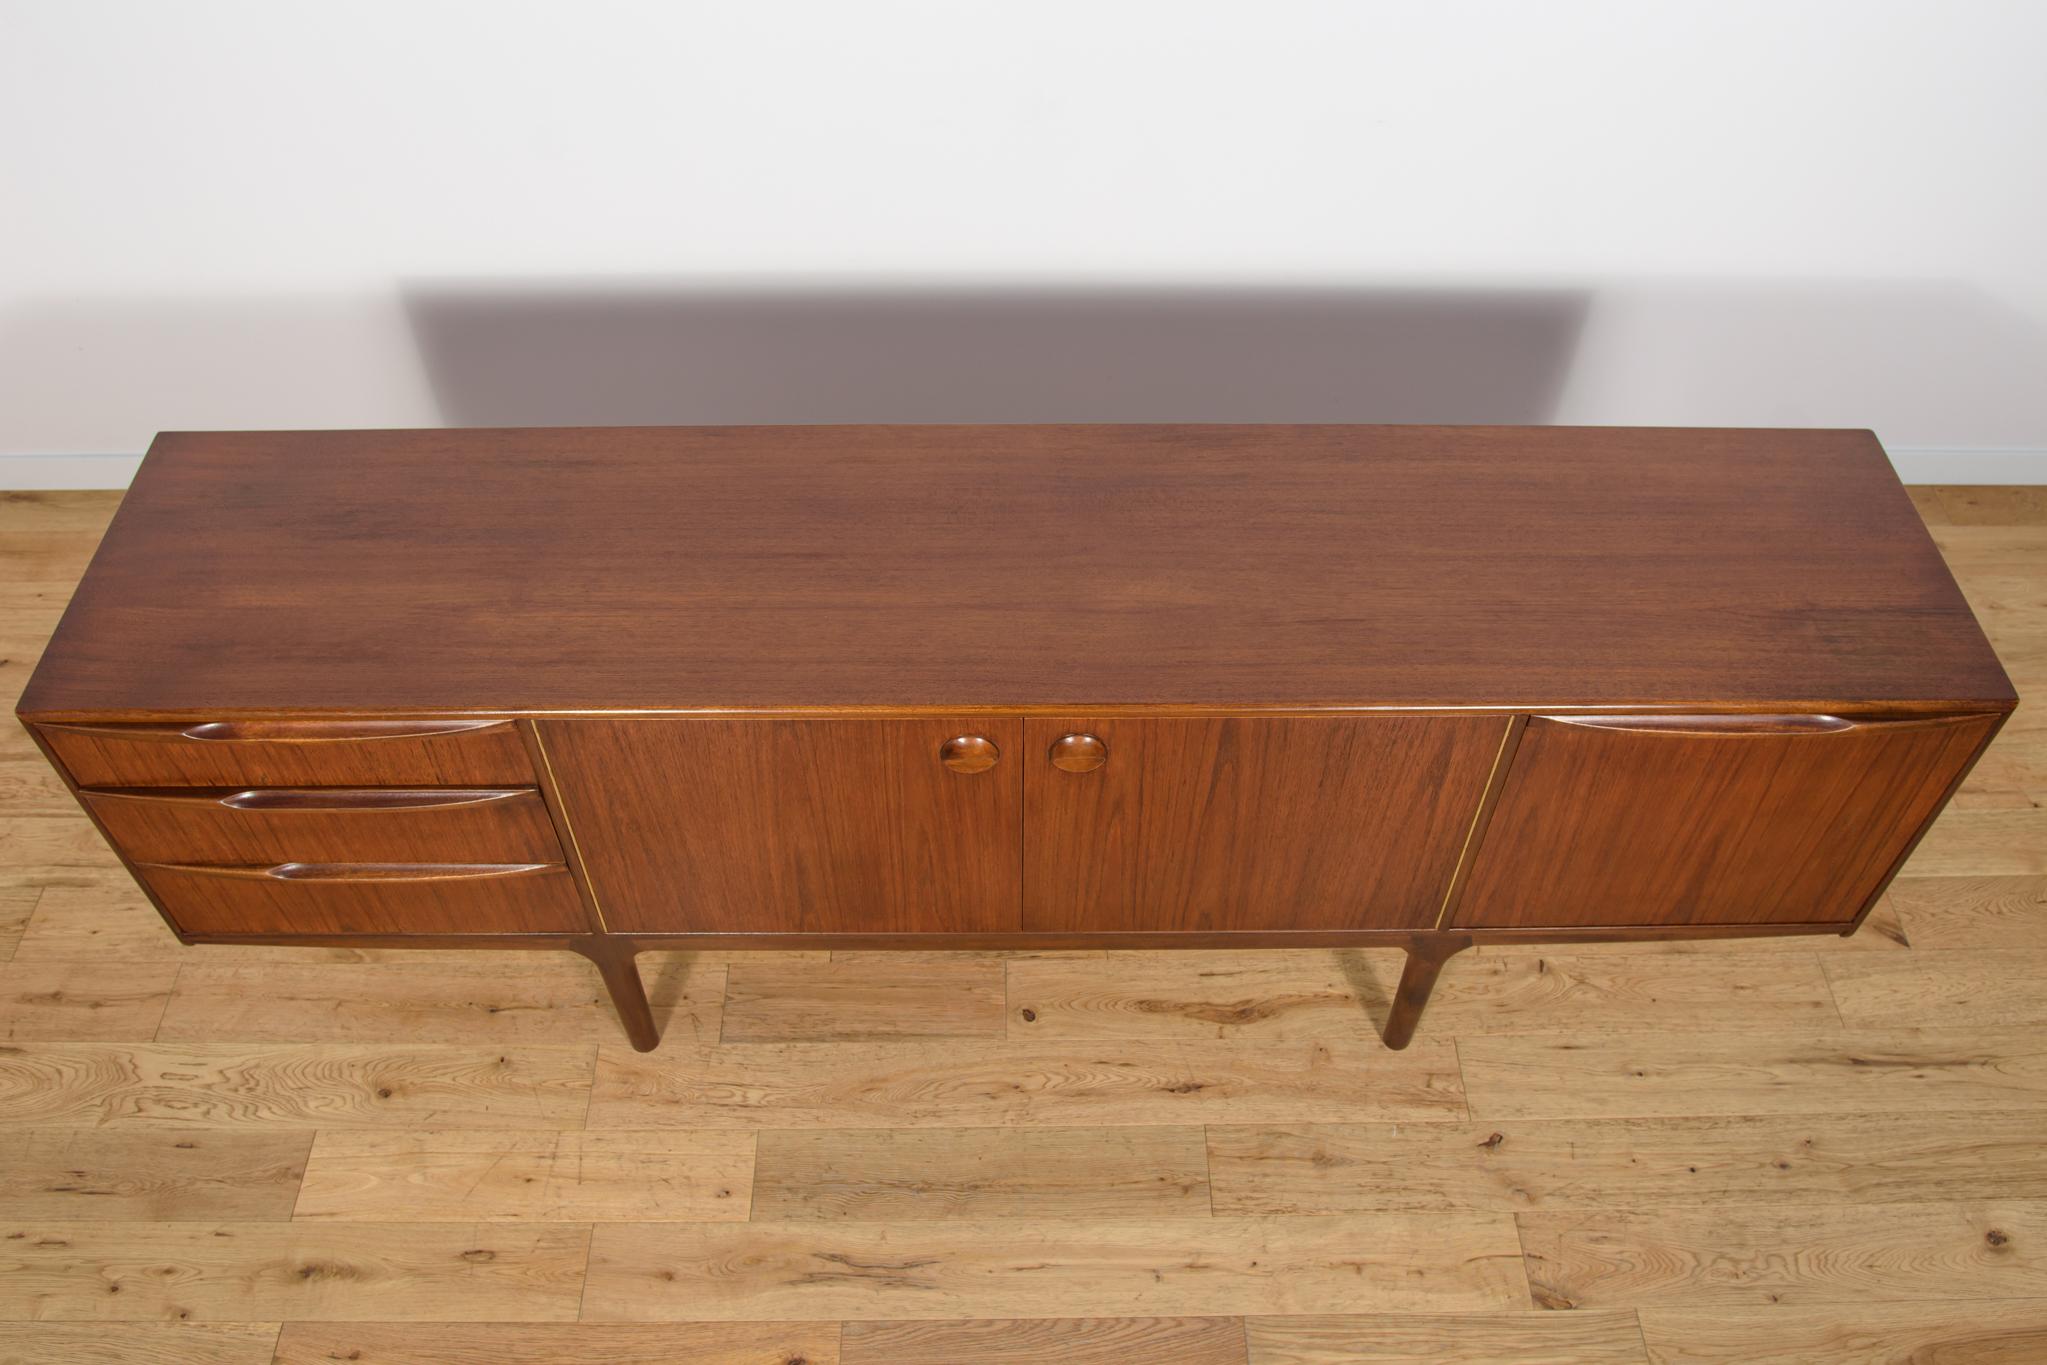 This mid-century sideboard in teak, designed Tom Robertson was produced in Great Britain by Mcintosh in the 1960s. The sideboard has three drawers located on the left side, in the middle there is a cabinet, on the right side there is a bar and a